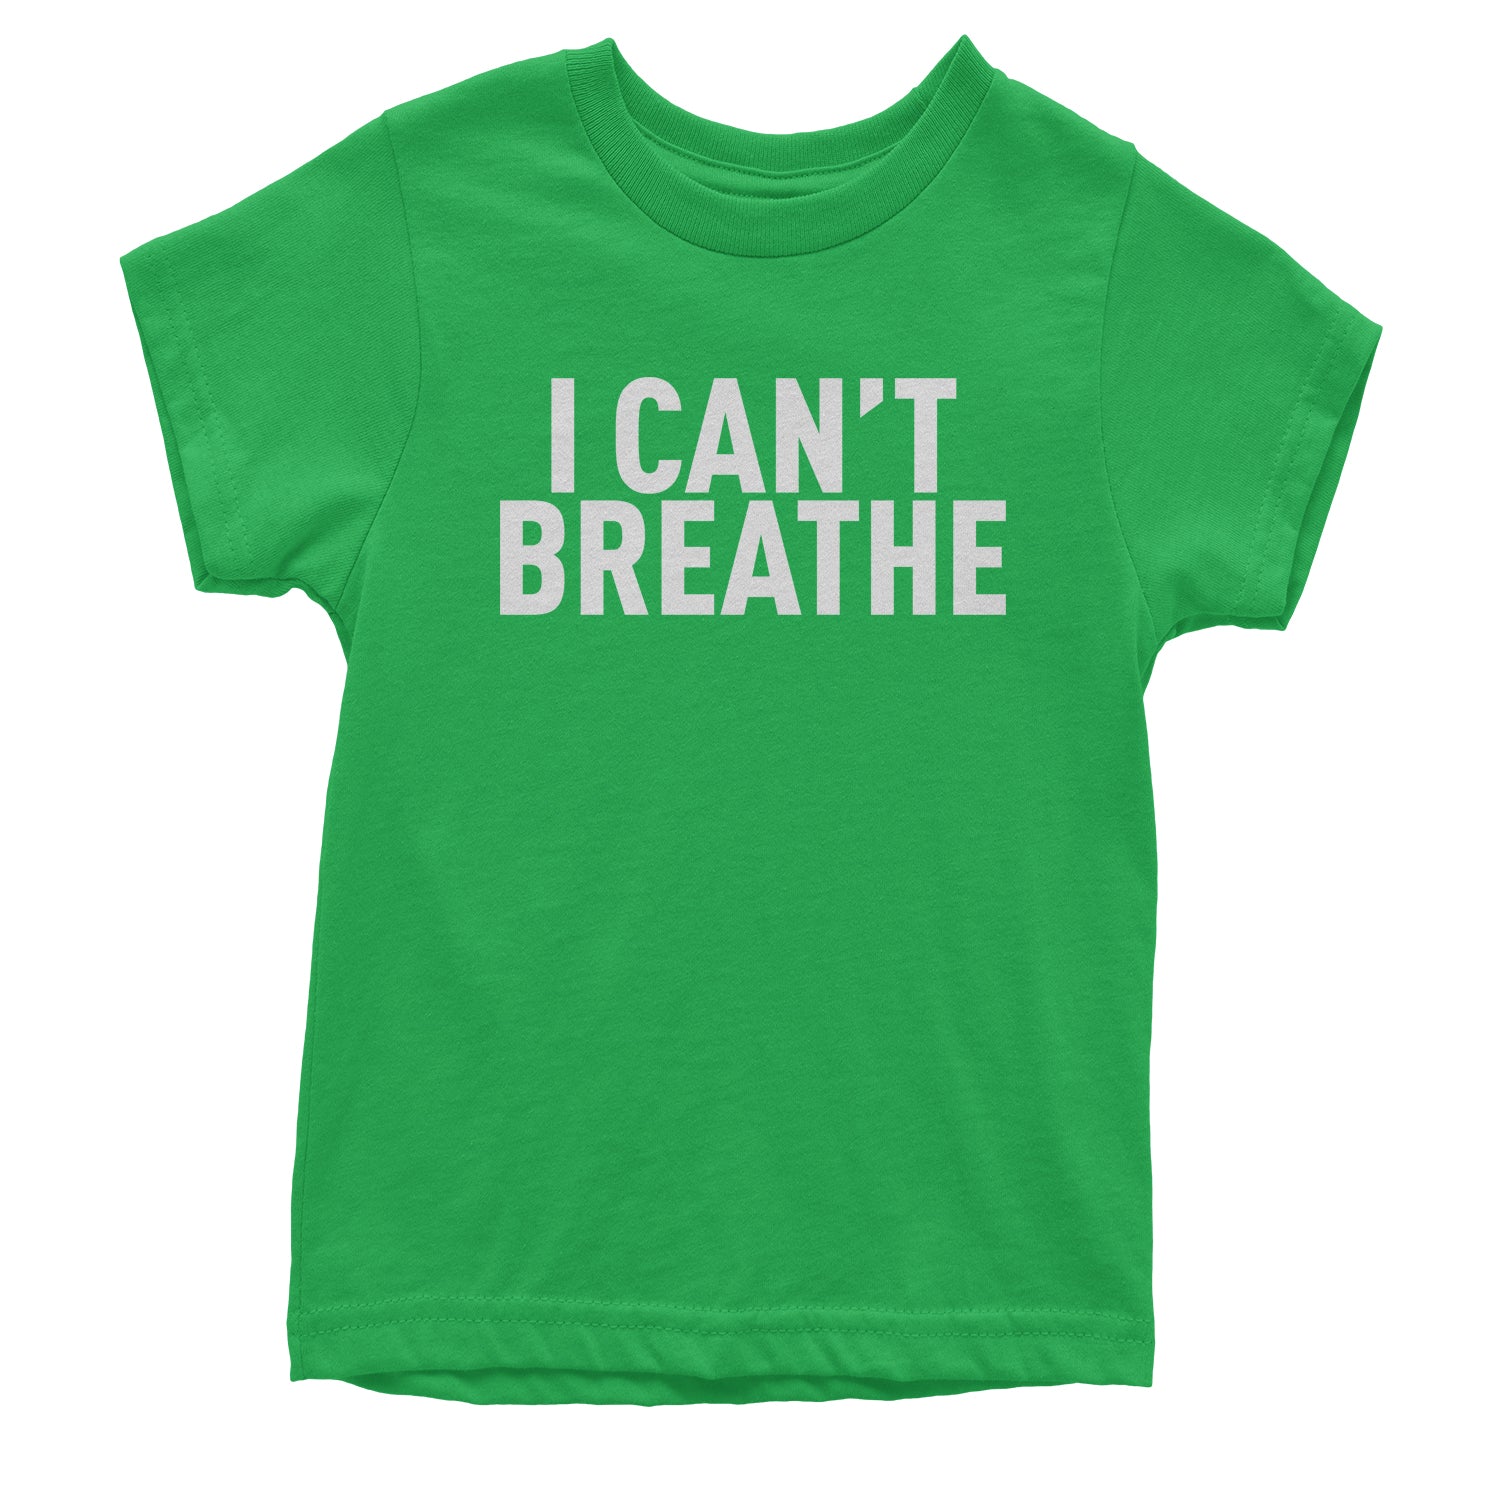 I Can't Breathe Social Justice Youth T-shirt african, africanamerican, american, black, blm, breonna, floyd, george, life, lives, matter, taylor by Expression Tees